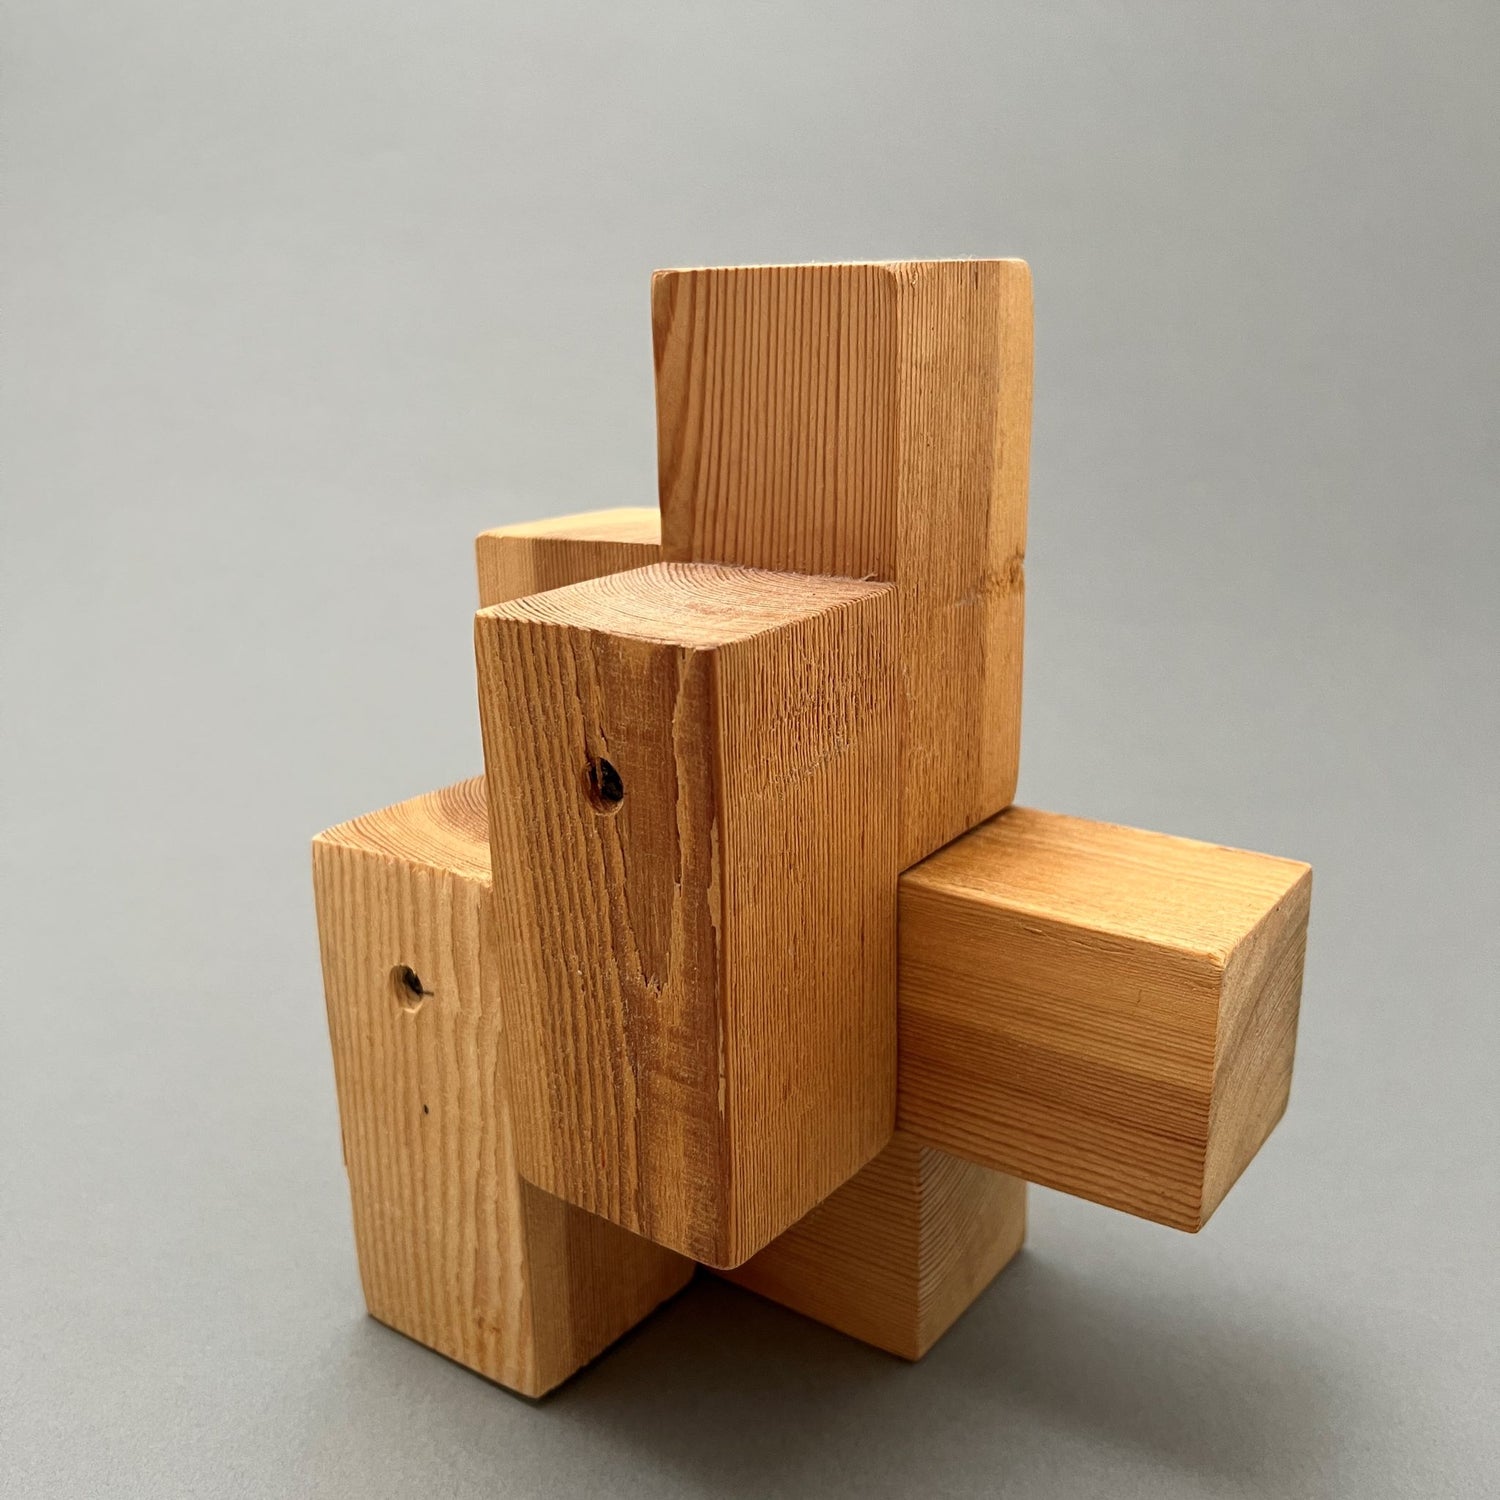 A kinectic sculpture made out of rectangular wooden pieces sitting on a gray background